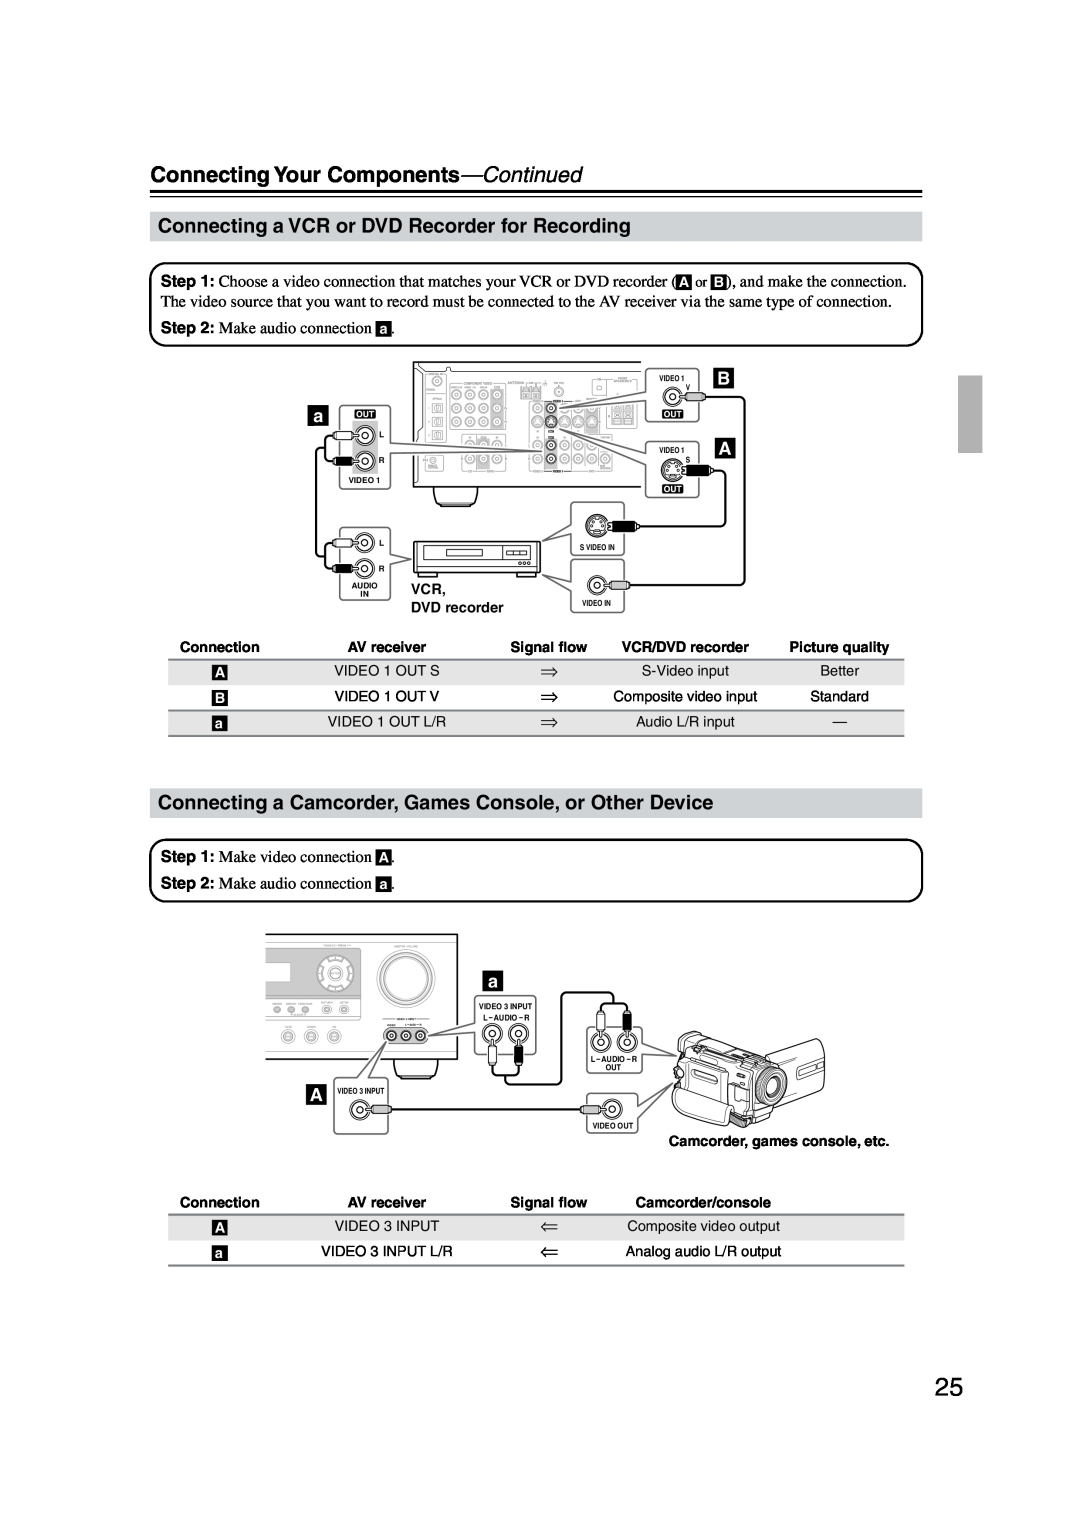 Onkyo TX-SR573 instruction manual Connecting a VCR or DVD Recorder for Recording, Connecting Your Components—Continued 